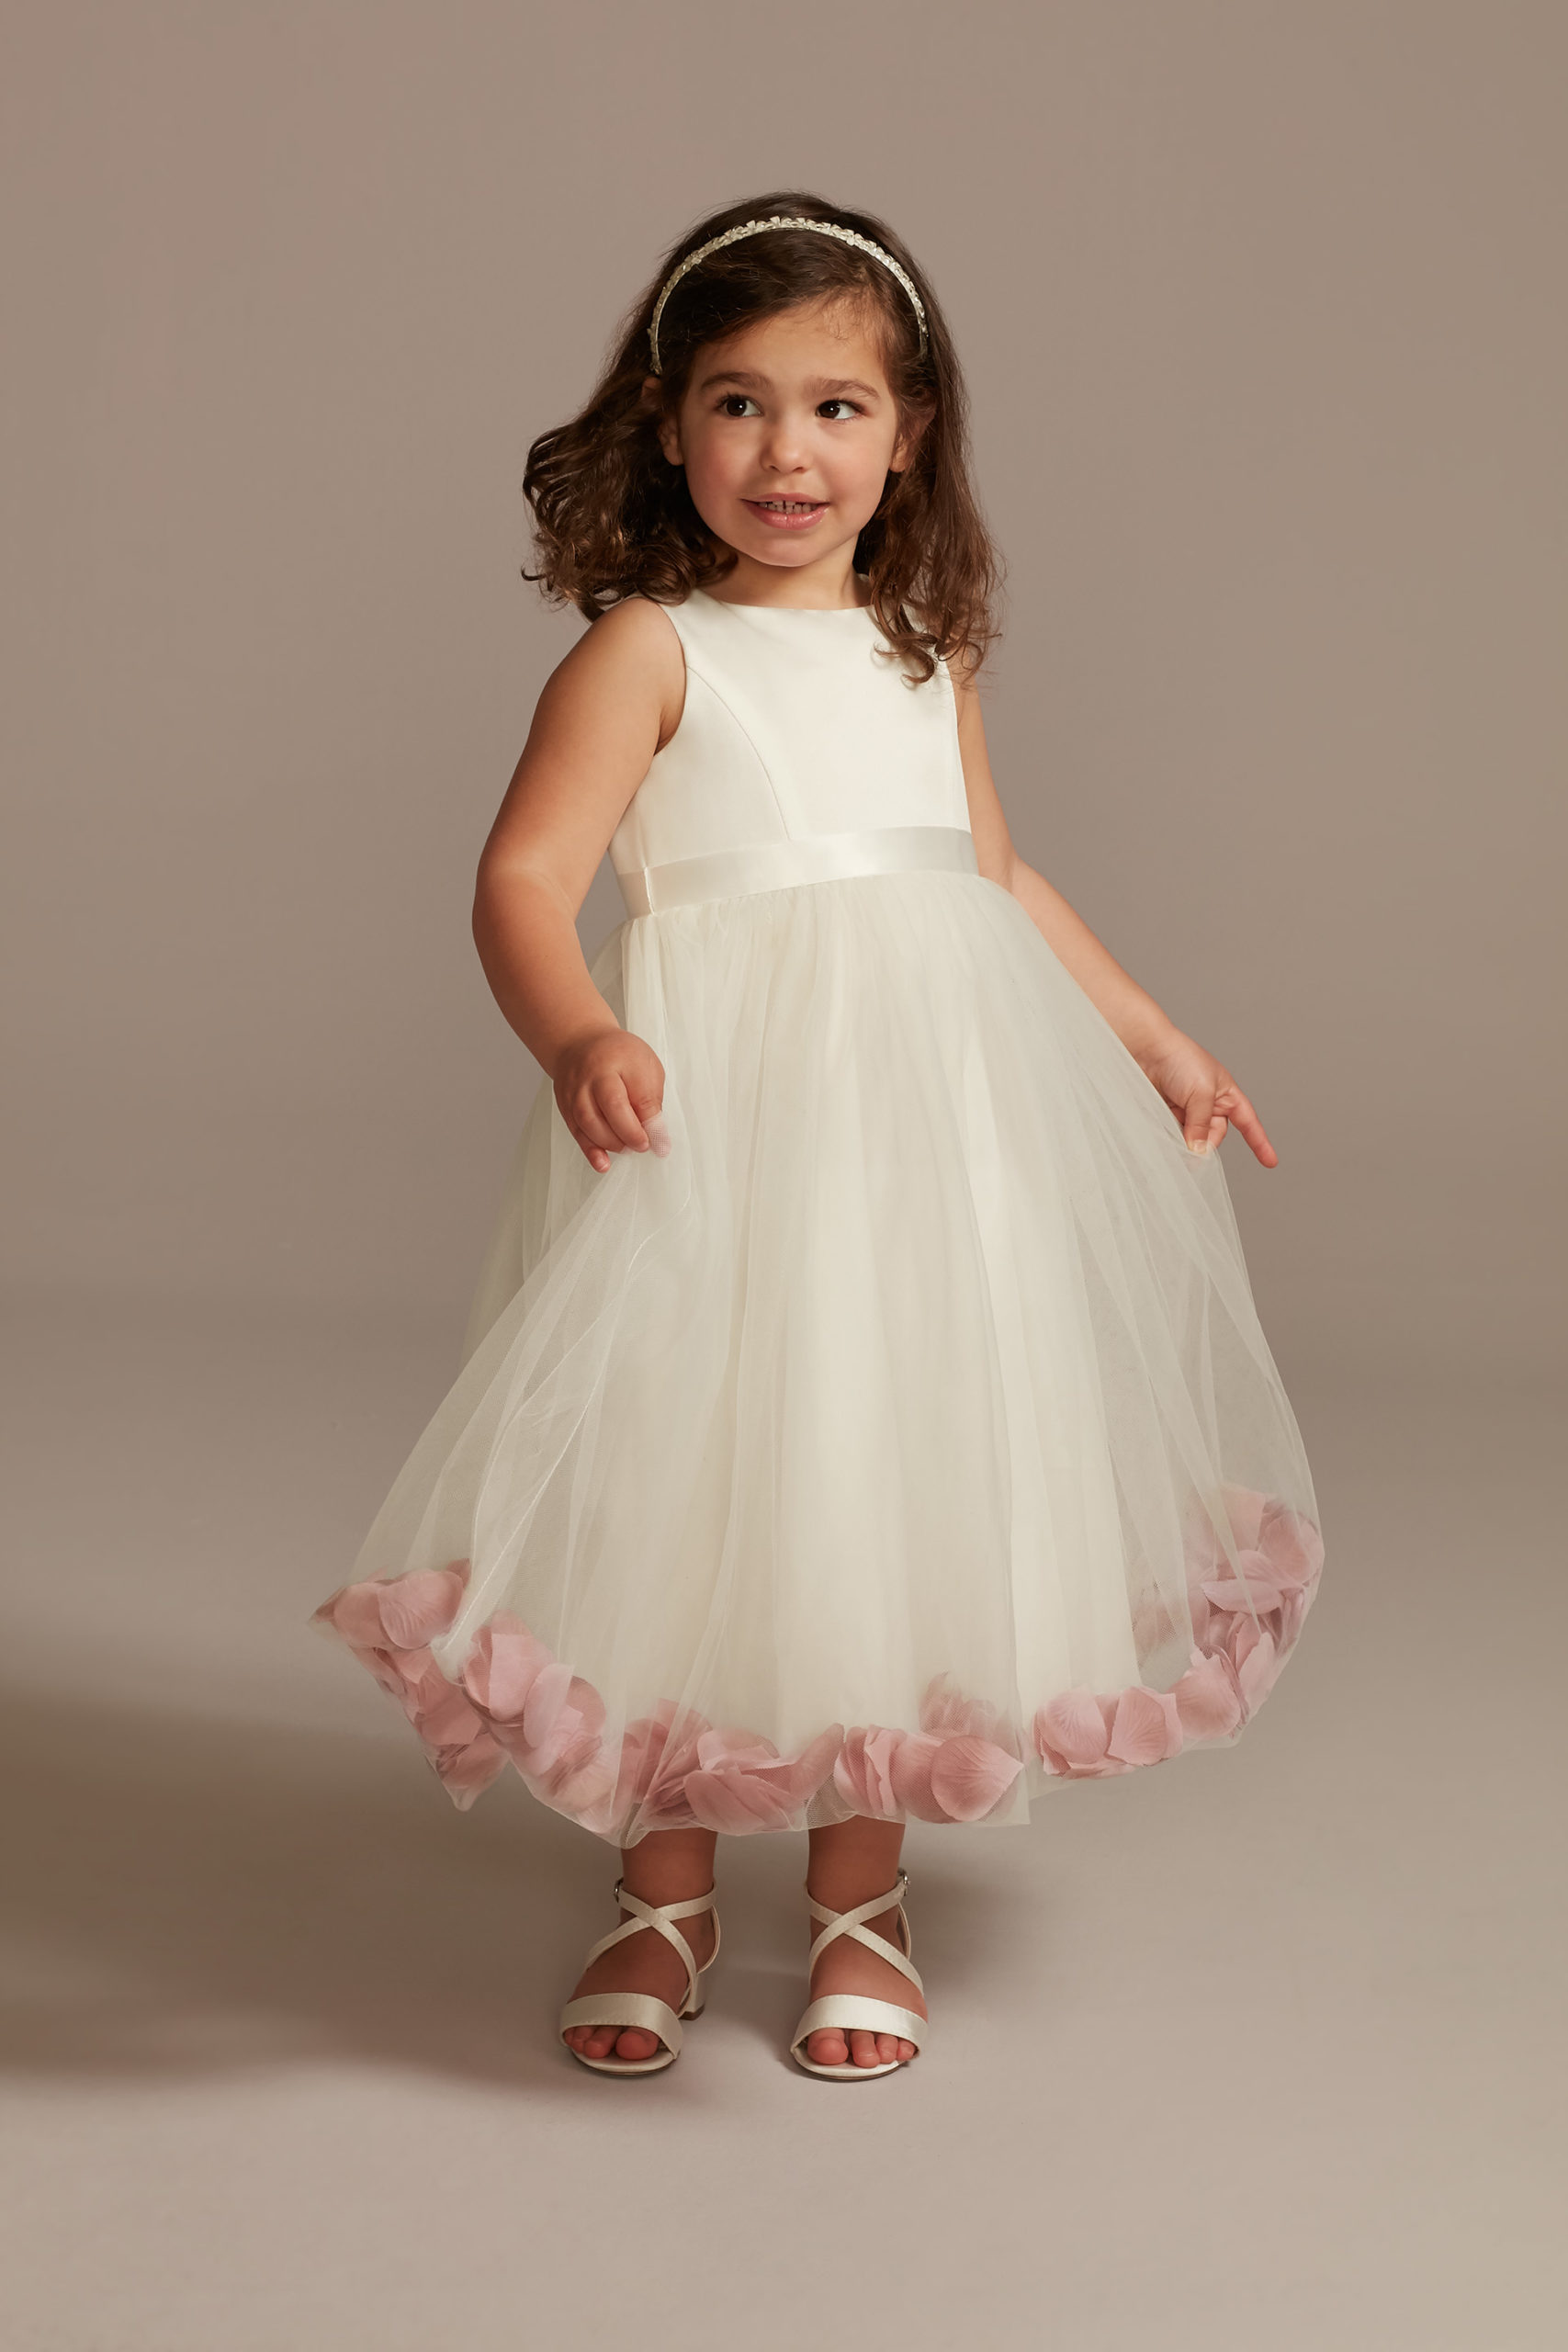 Matching Flower Girl Dresses to Bridal Gowns - Belle The Magazine